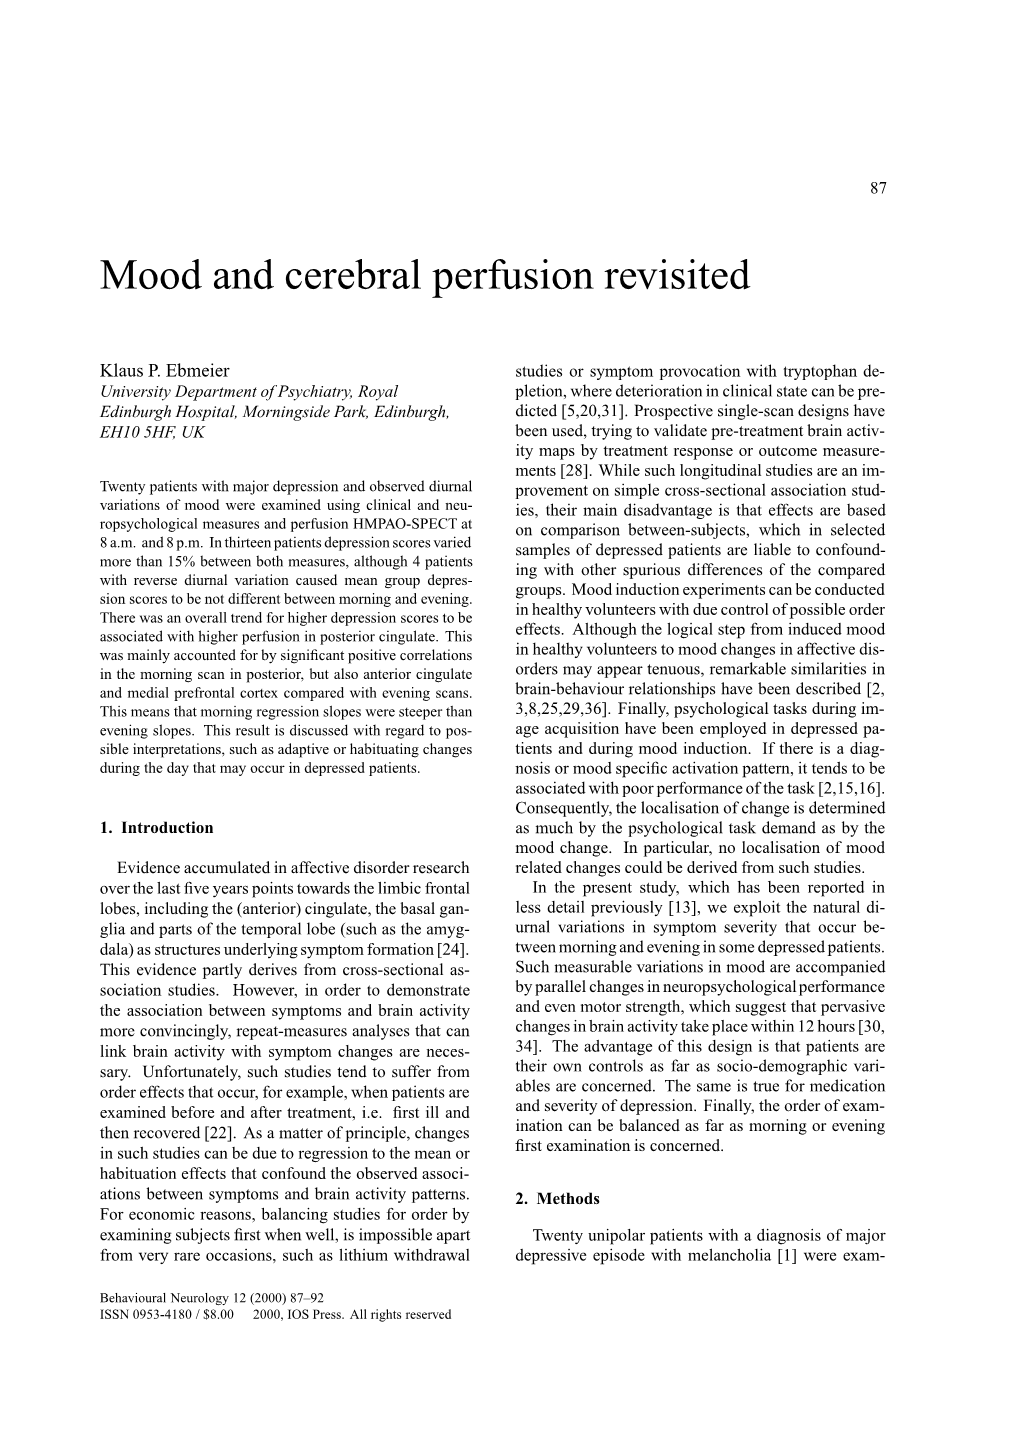 Mood and Cerebral Perfusion Revisited